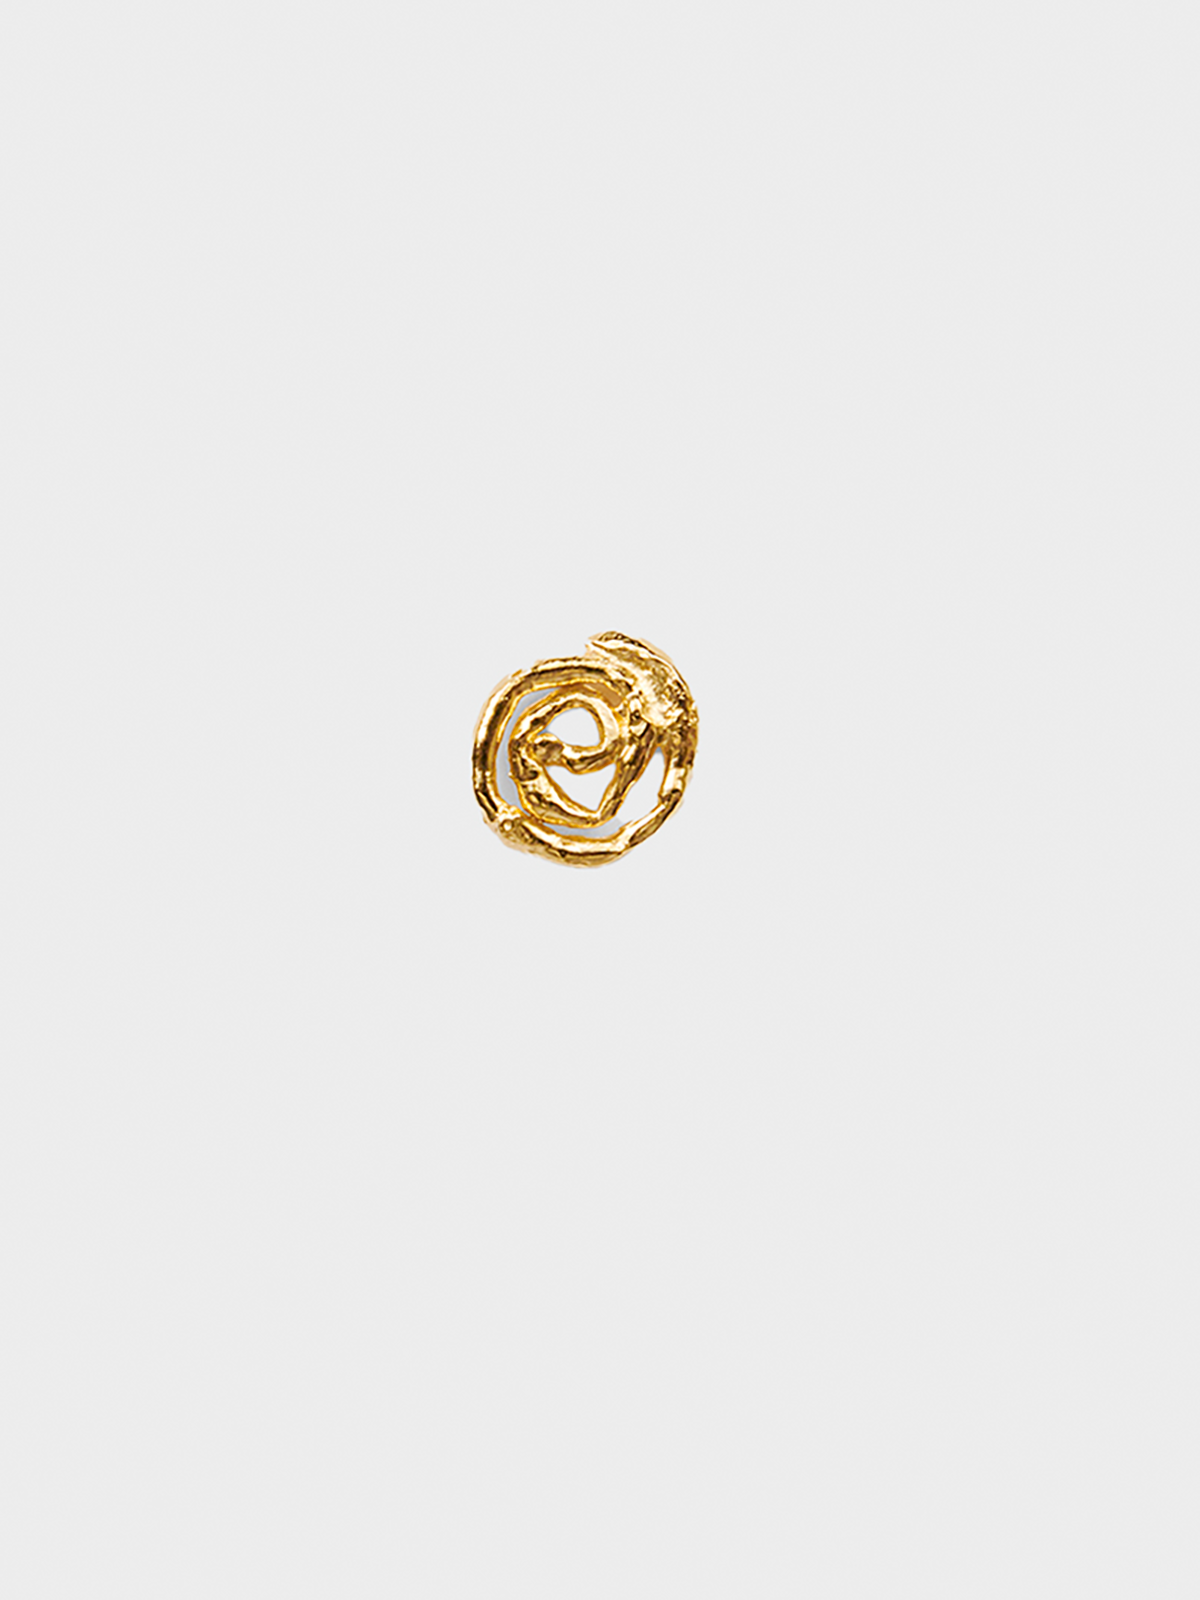 Lea Hoyer - Evie Earring with Gold Plating